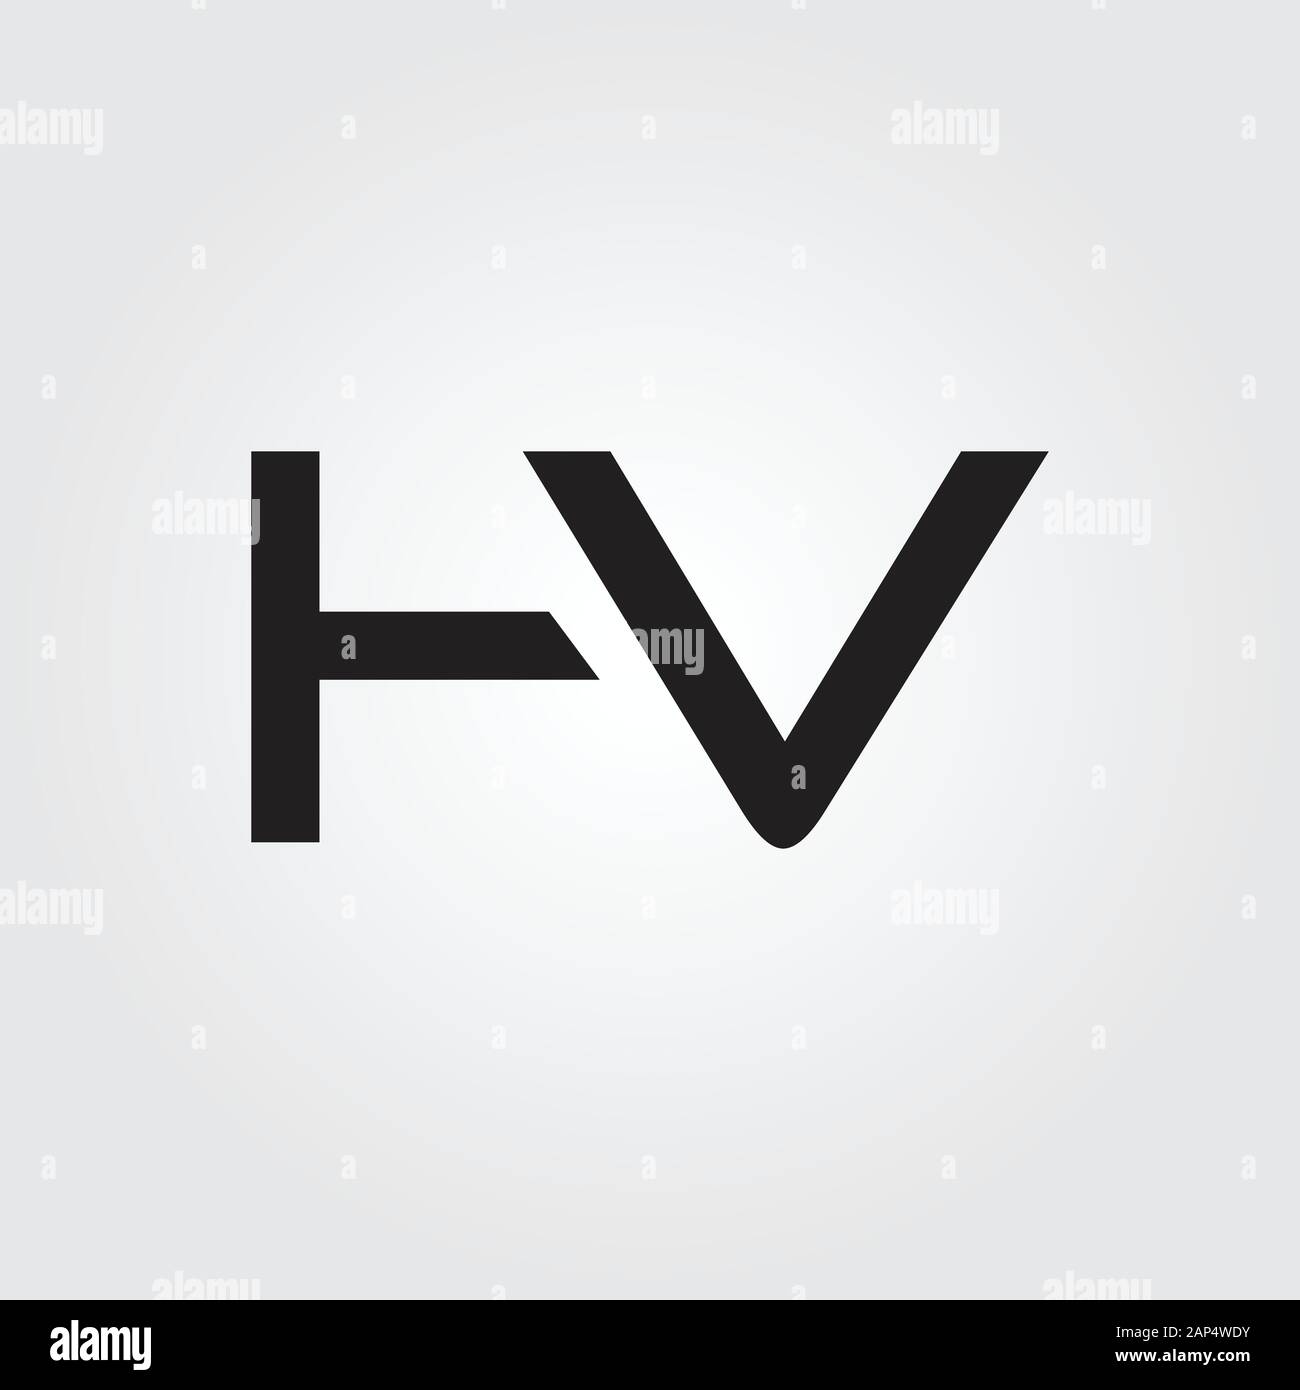 Hv logo with circle rounded negative space design Vector Image